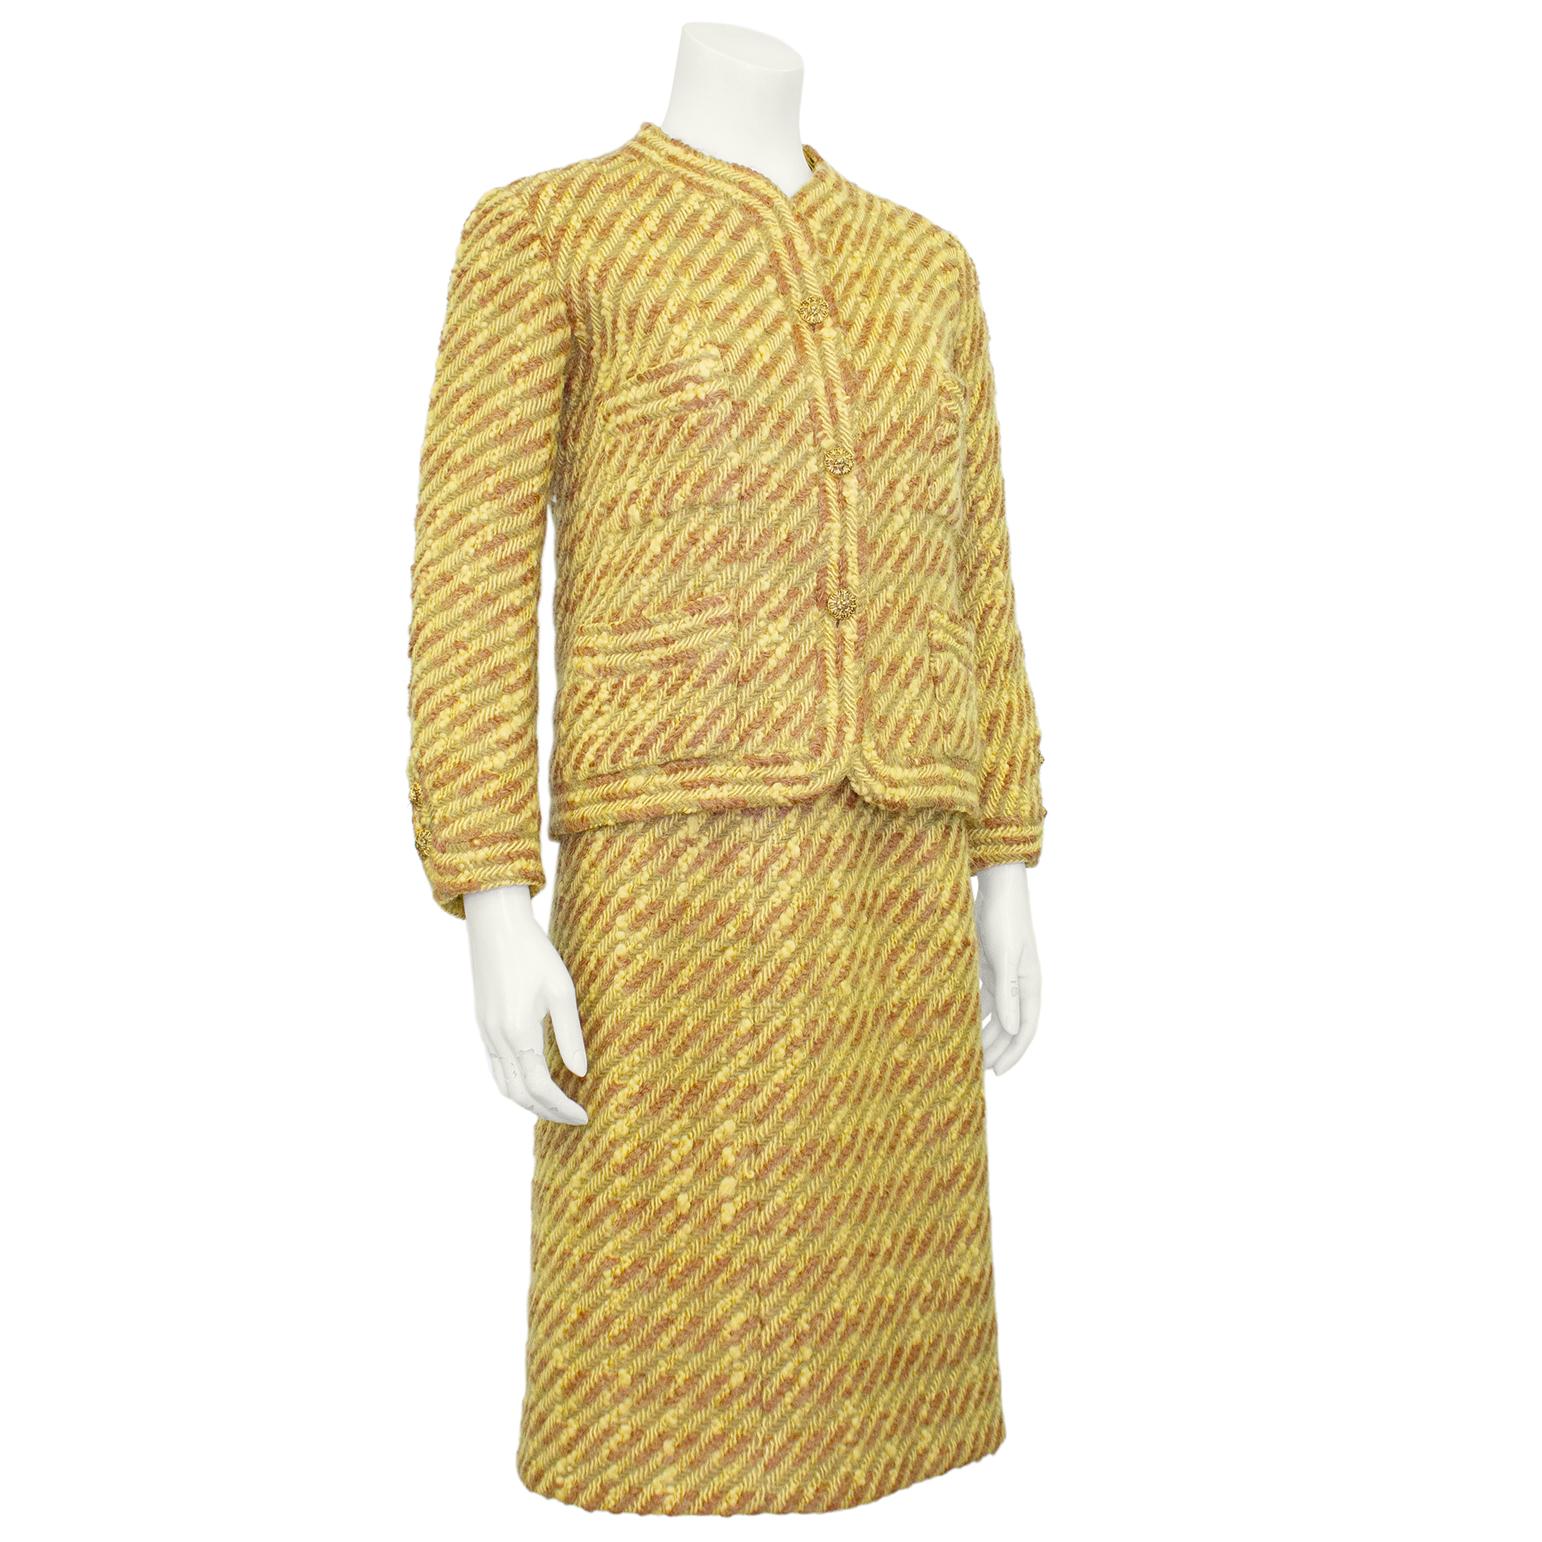 1960s Chanel Haute Couture Gold and Brown Jacket and Dress Ensemble In Good Condition For Sale In Toronto, Ontario